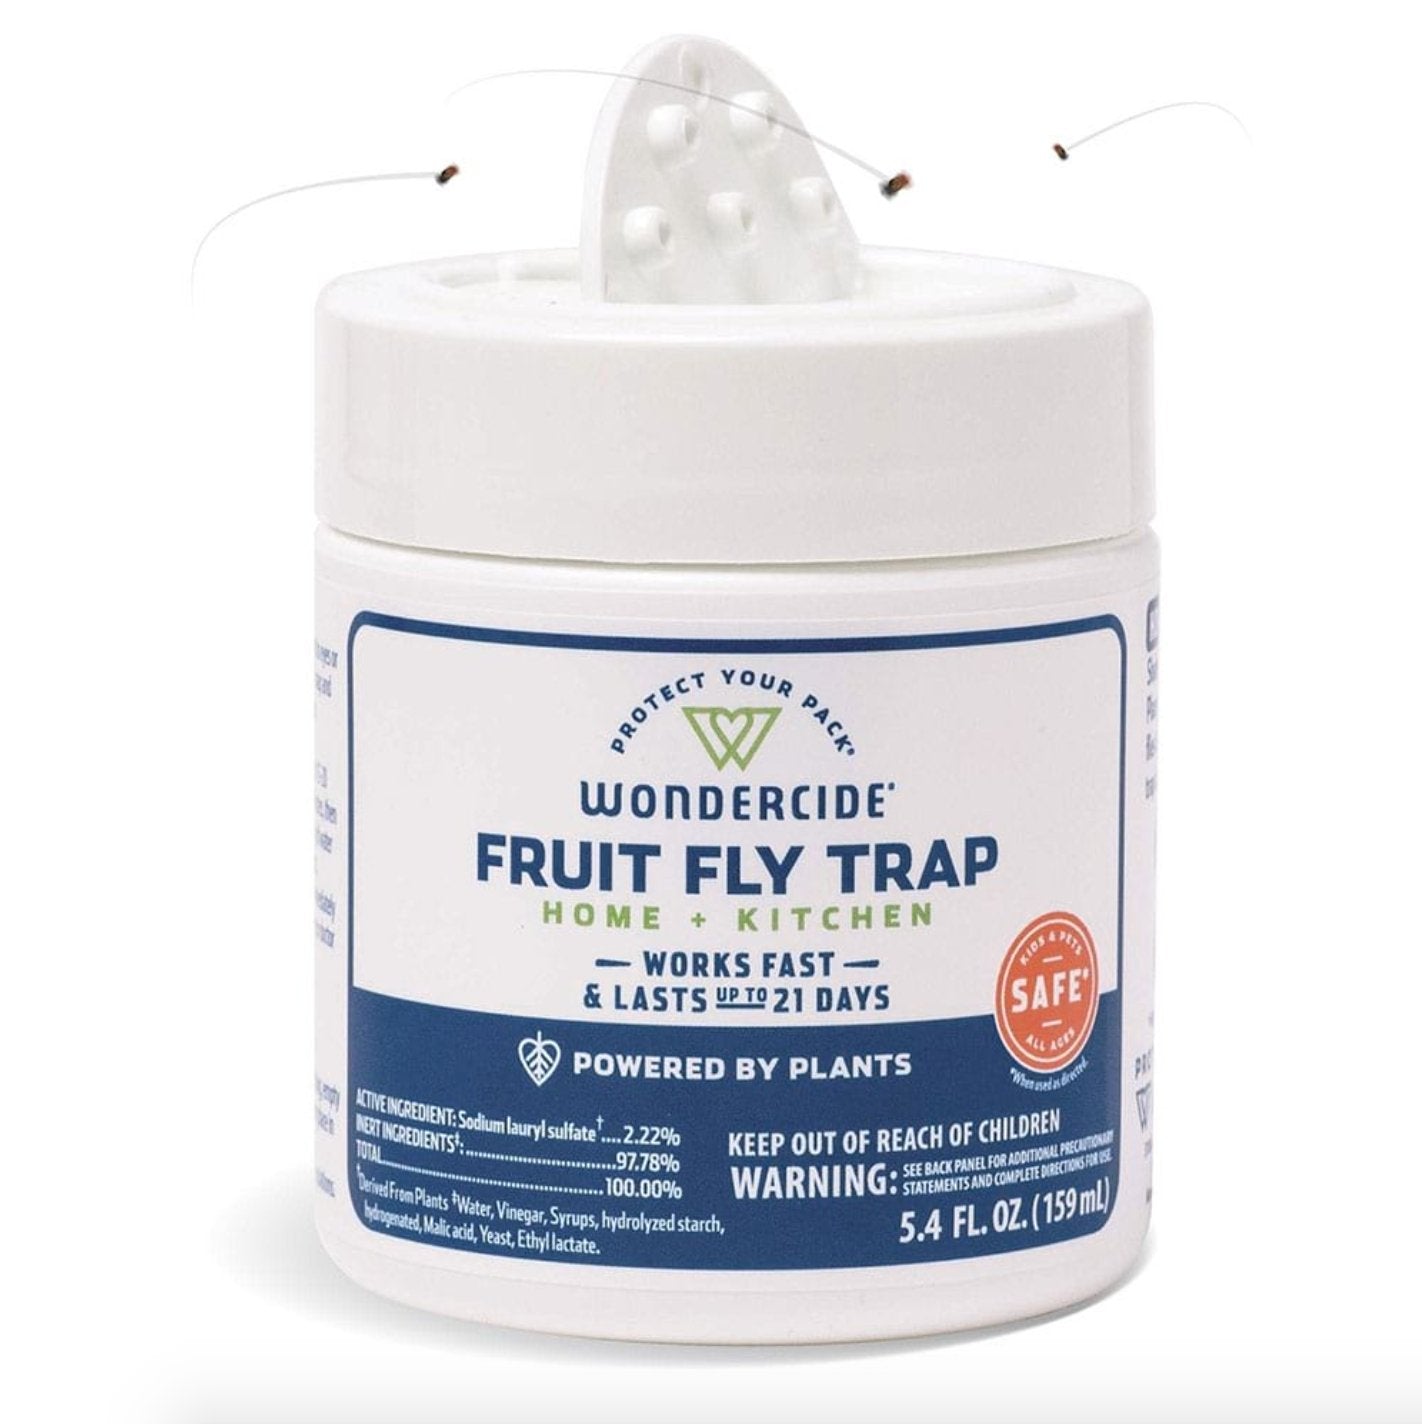 Fruit Fly Traps